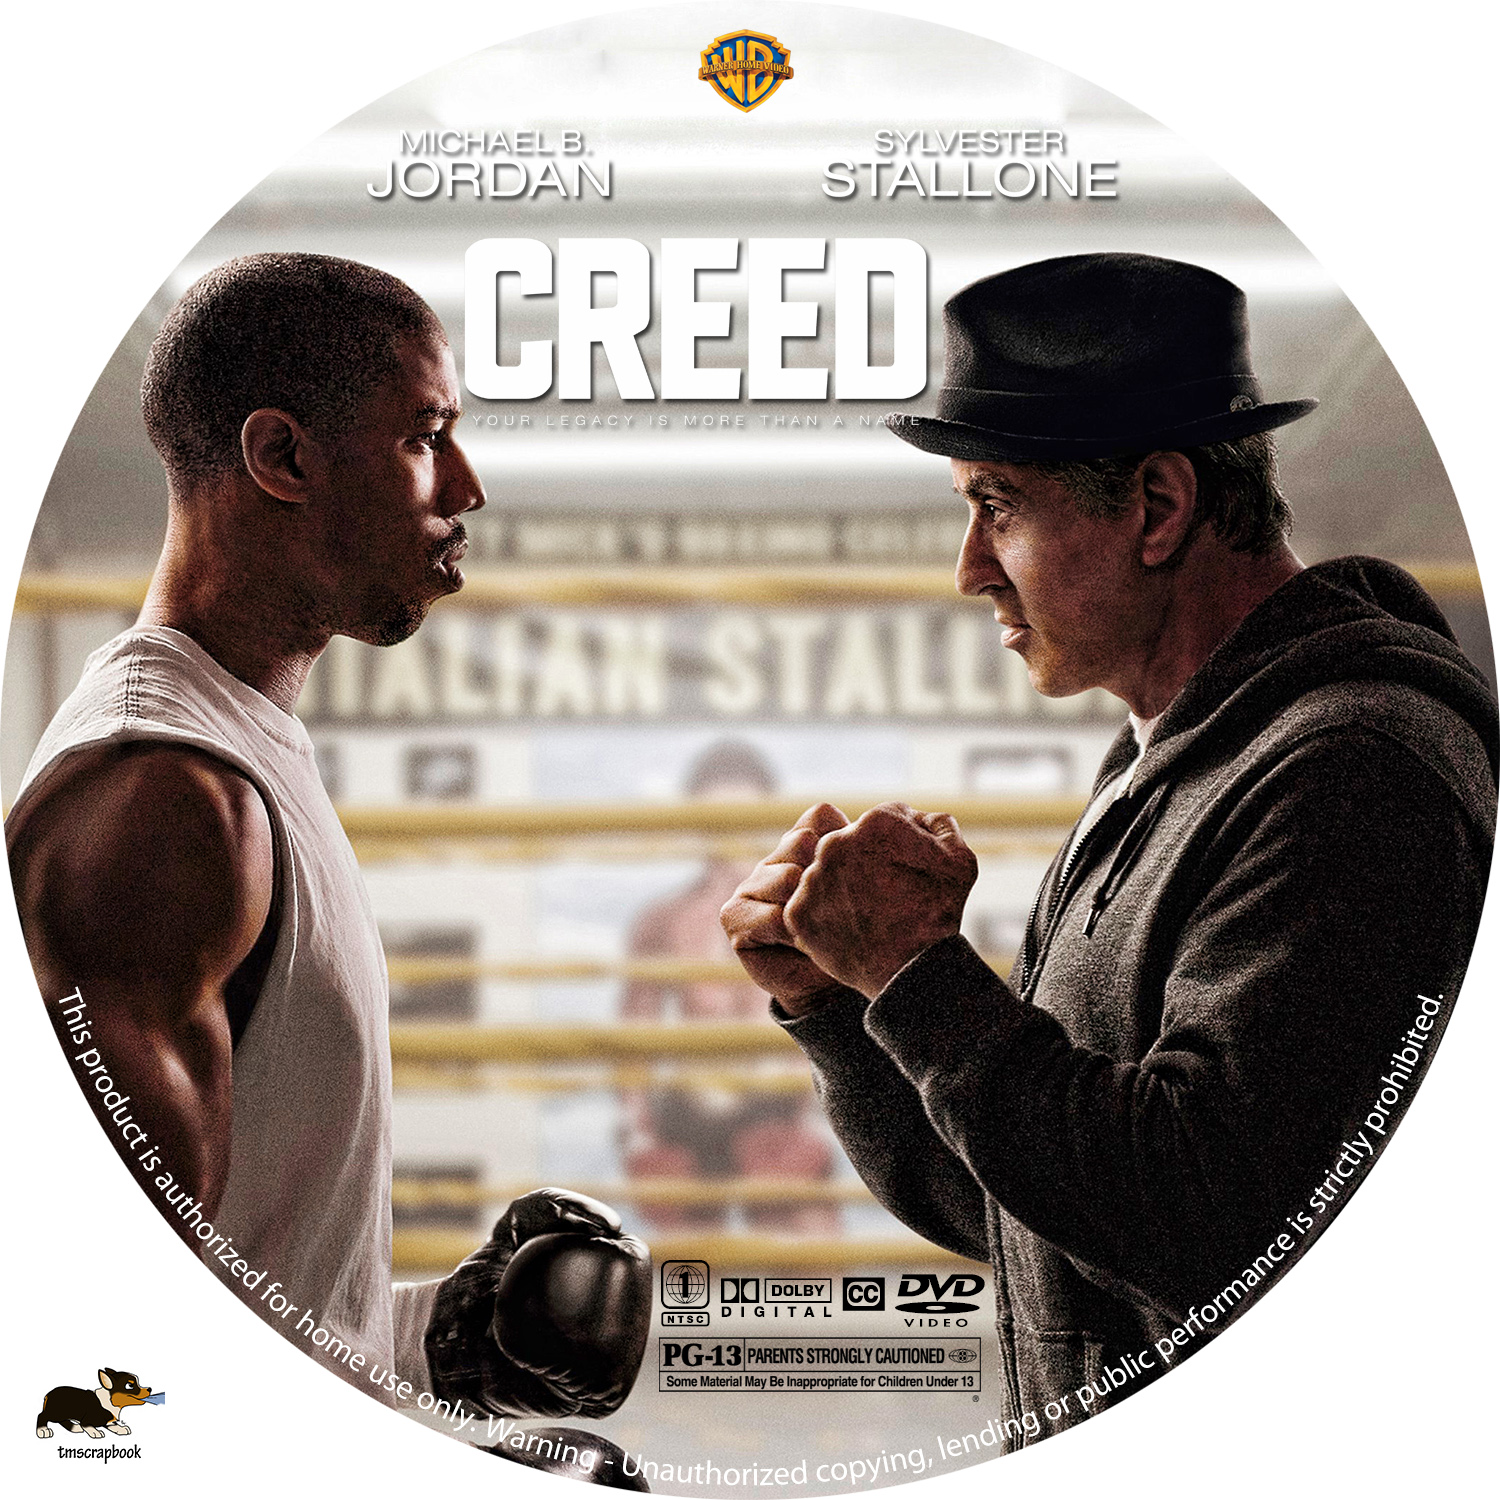 Creed soundtrack